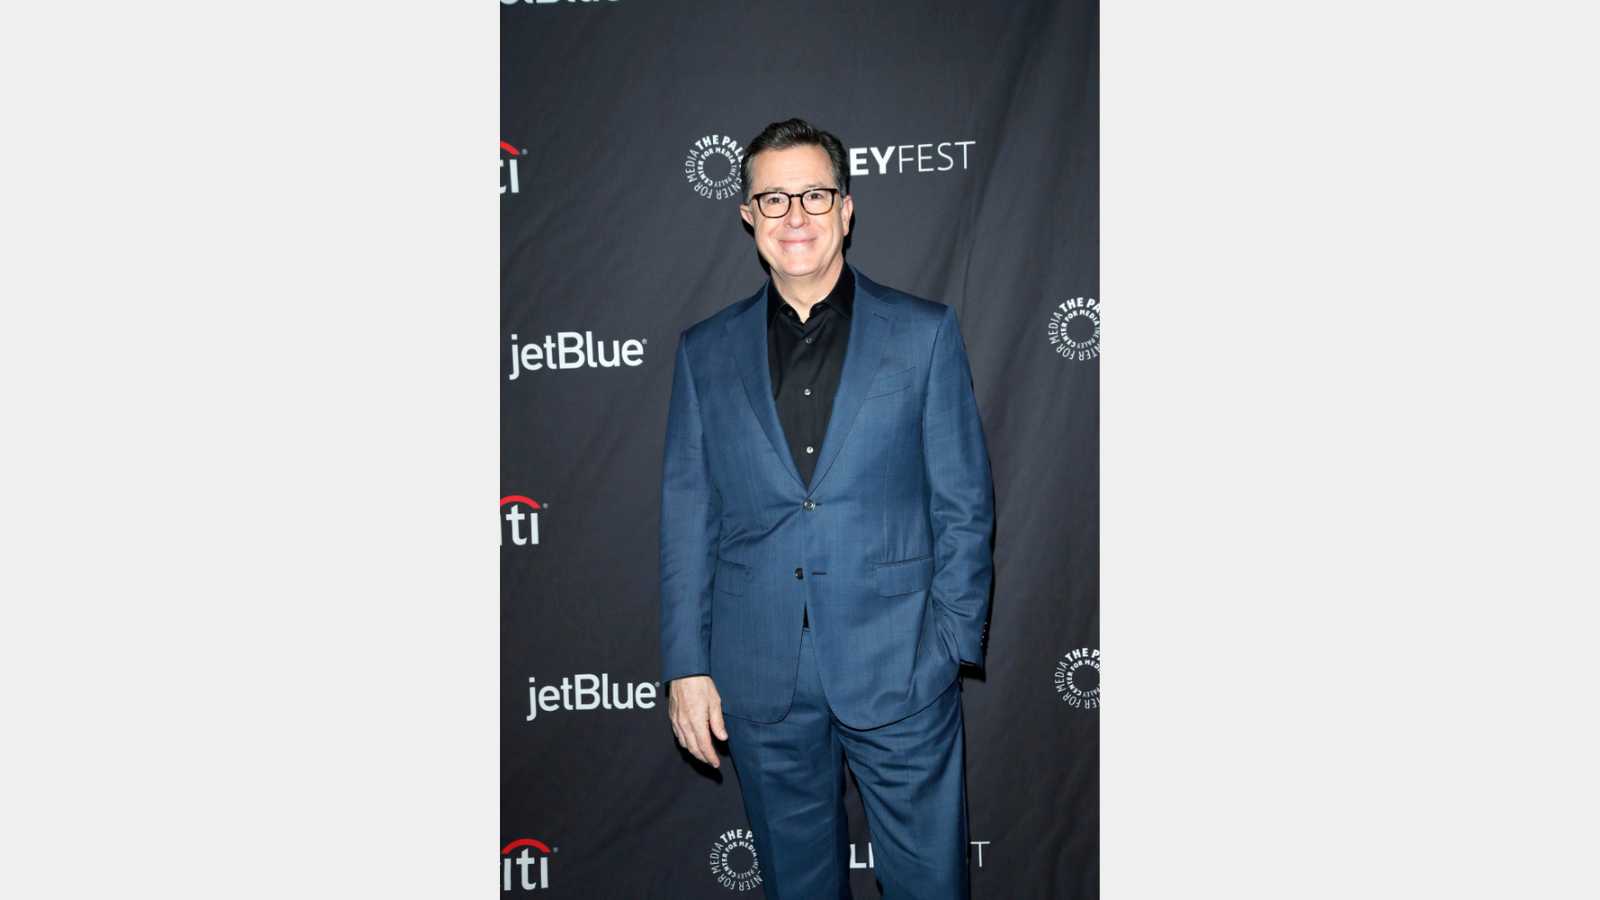 LOS ANGELES - MAR 16: Stephen Colbert at the PaleyFest - "An Evening With Stephen Colbert" Event at the Dolby Theater on March 16, 2019 in Los Angeles, CA